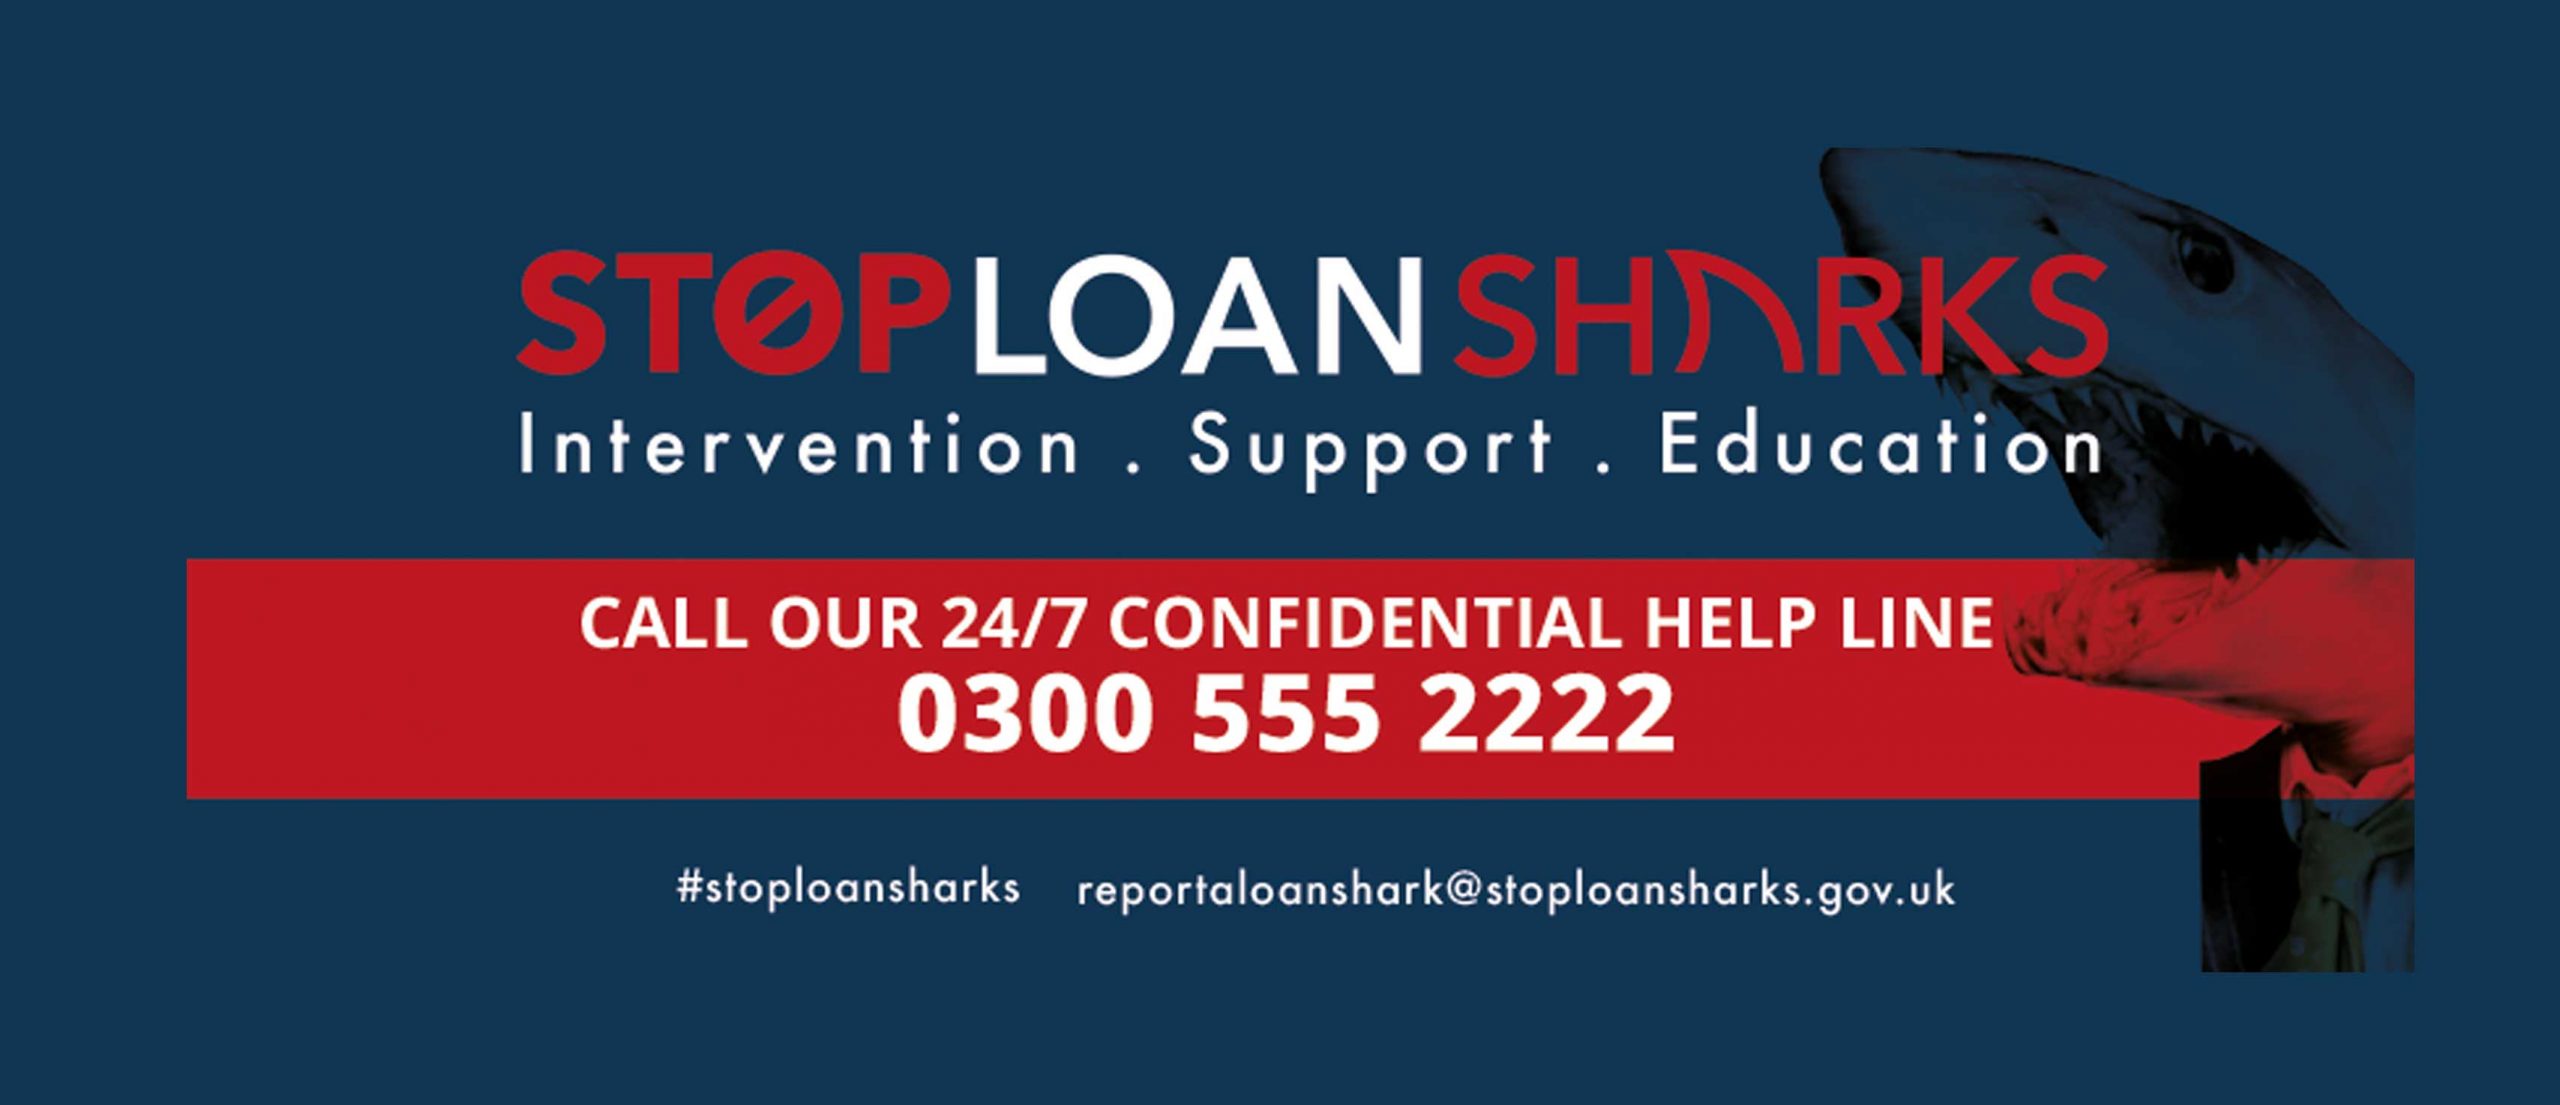 Stop the Loan Sharks